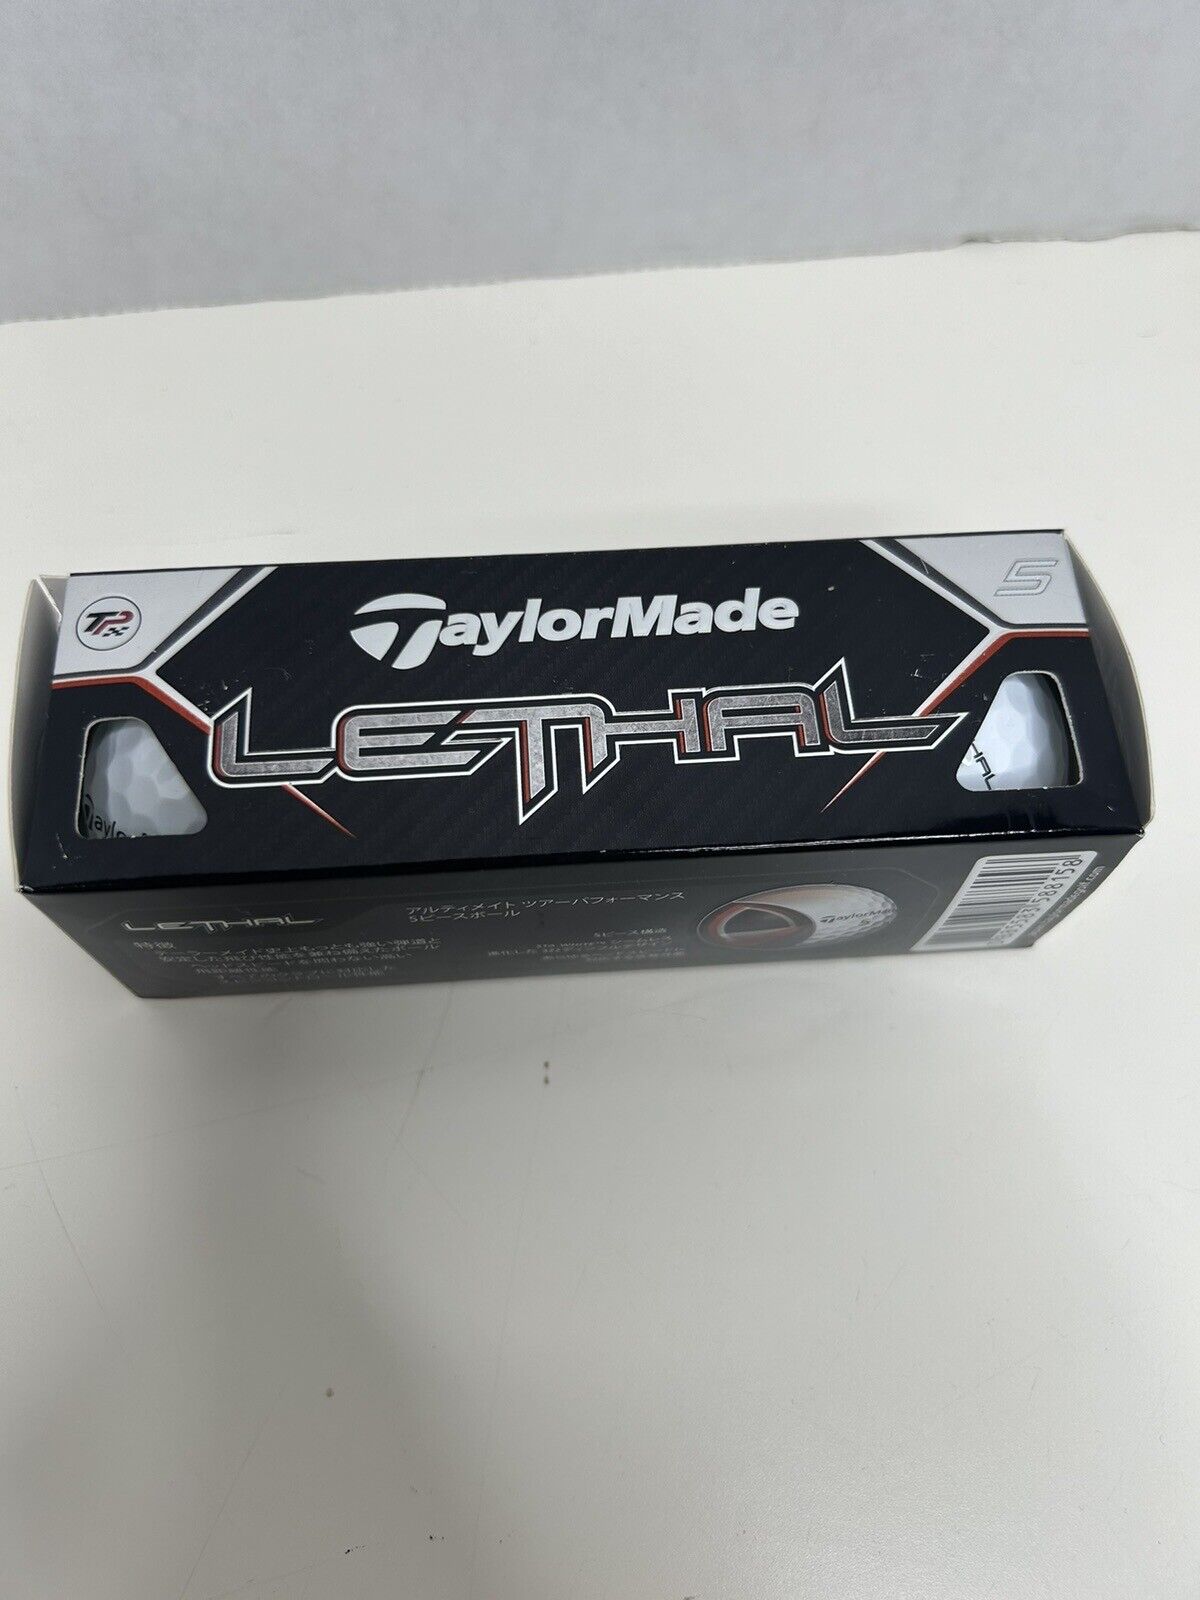 NEW TaylorMade LETHAL TP Golf Balls 1 Sleeve 3 New In Box Balls Mt Fuji Stamp